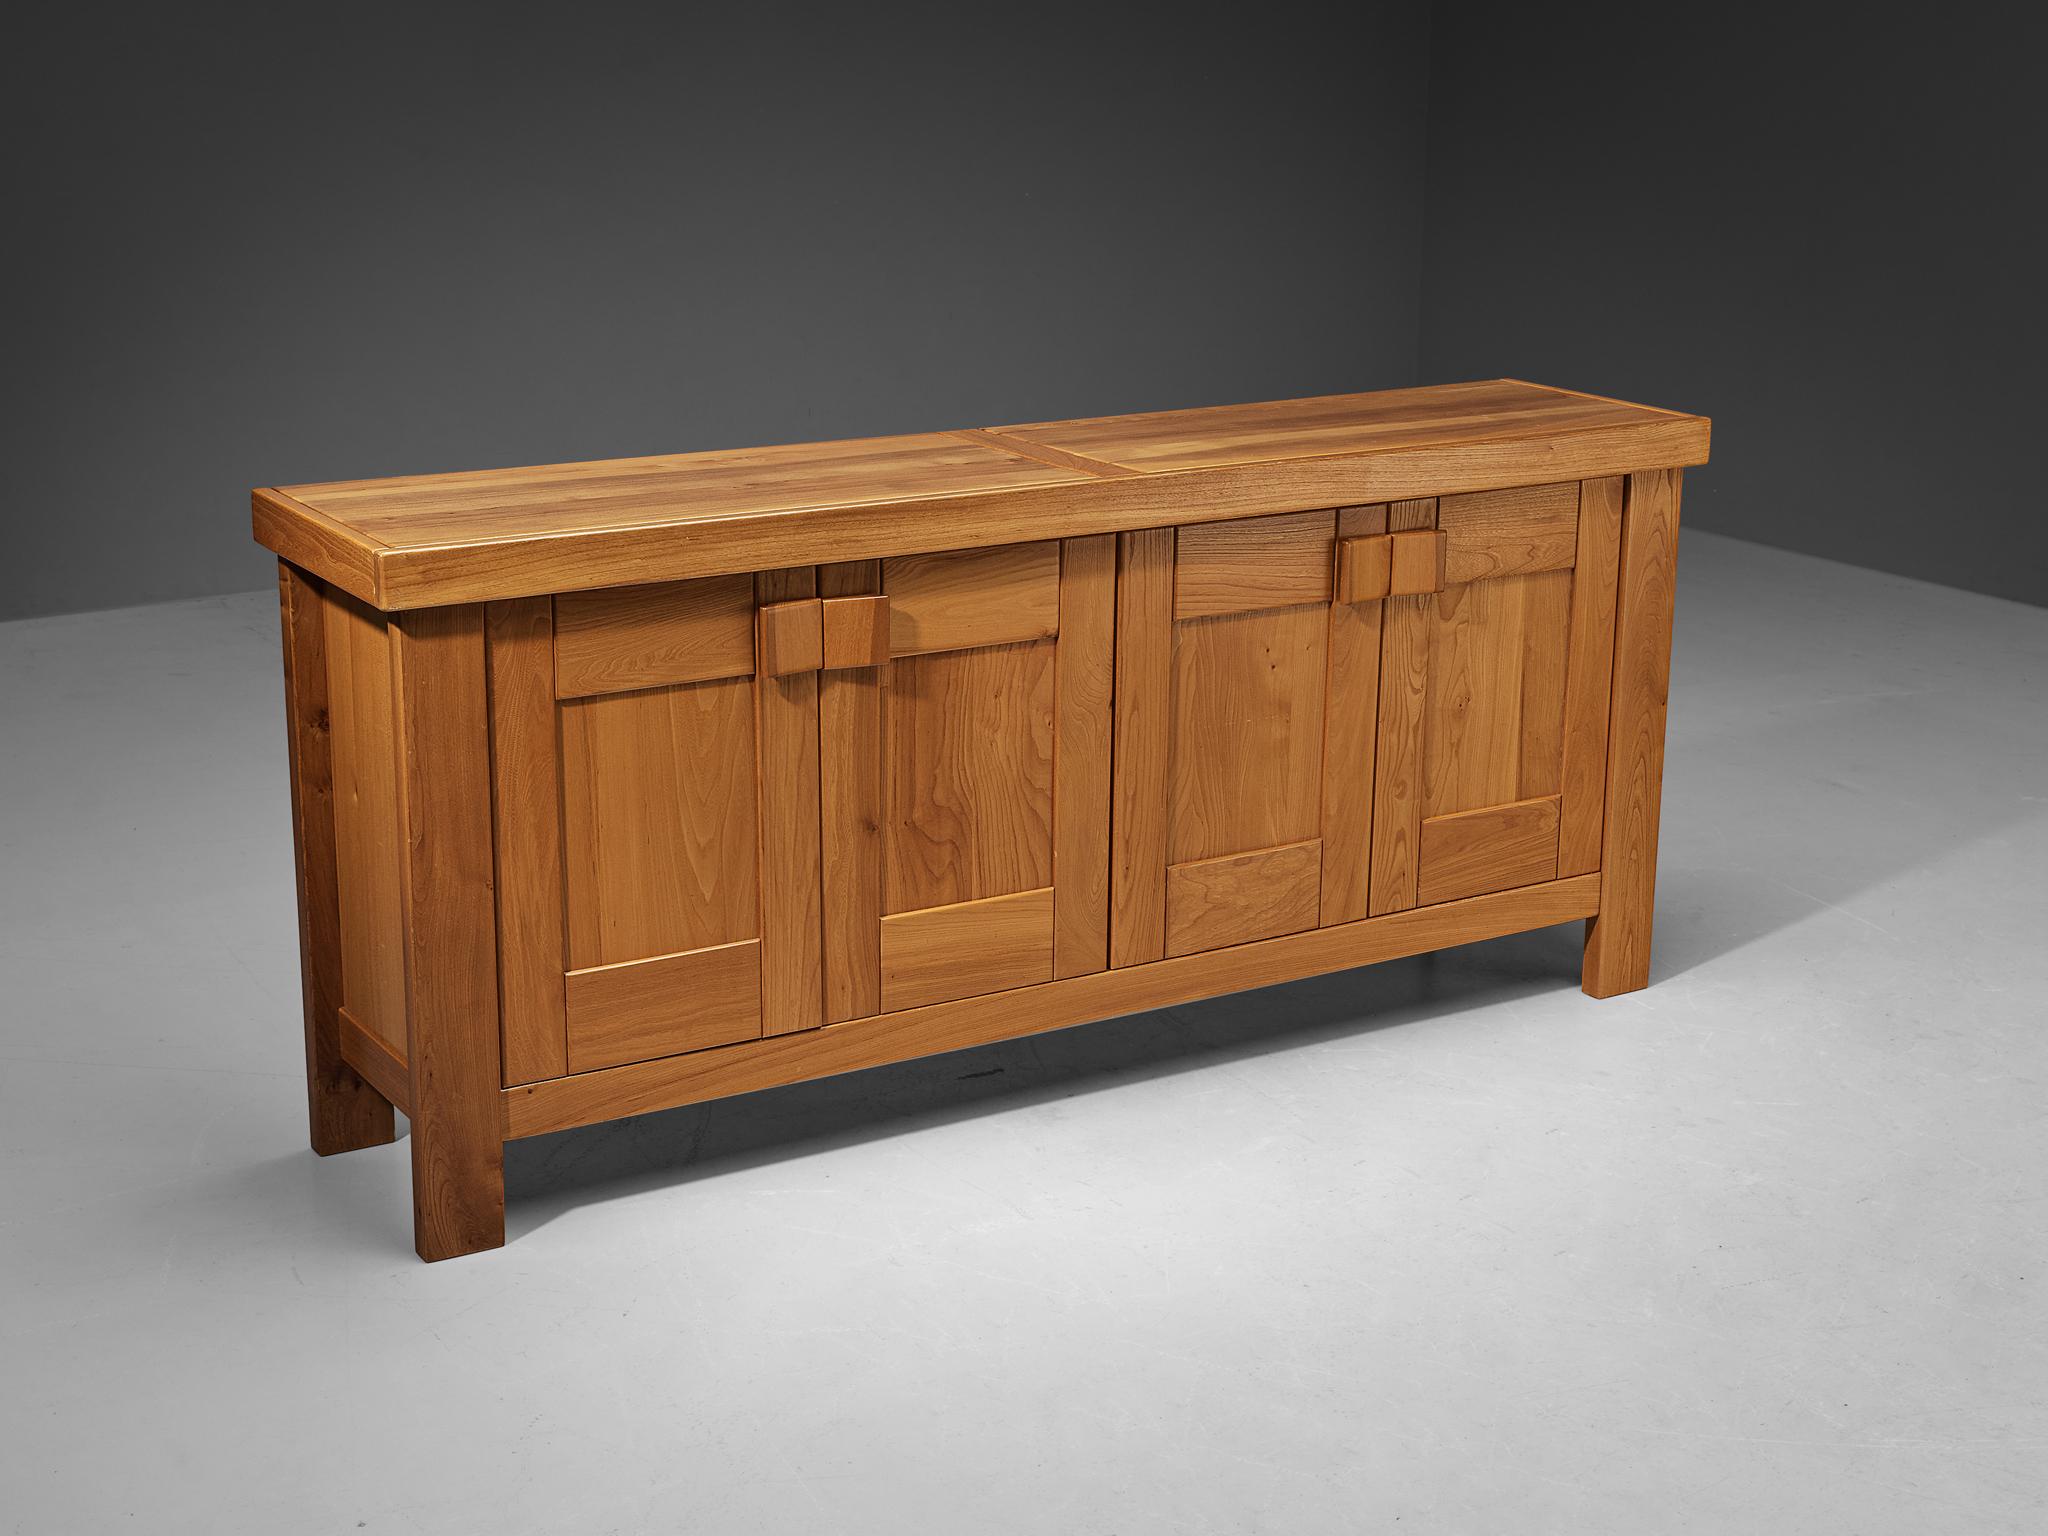 Maison Regain sideboard, elm, France, 1970s

Stunning French sideboard executed in elm, designed by Maison Regain. The buffet is sturdy and combines a simplified yet complex design with nifty, solid construction details that characterize Maison